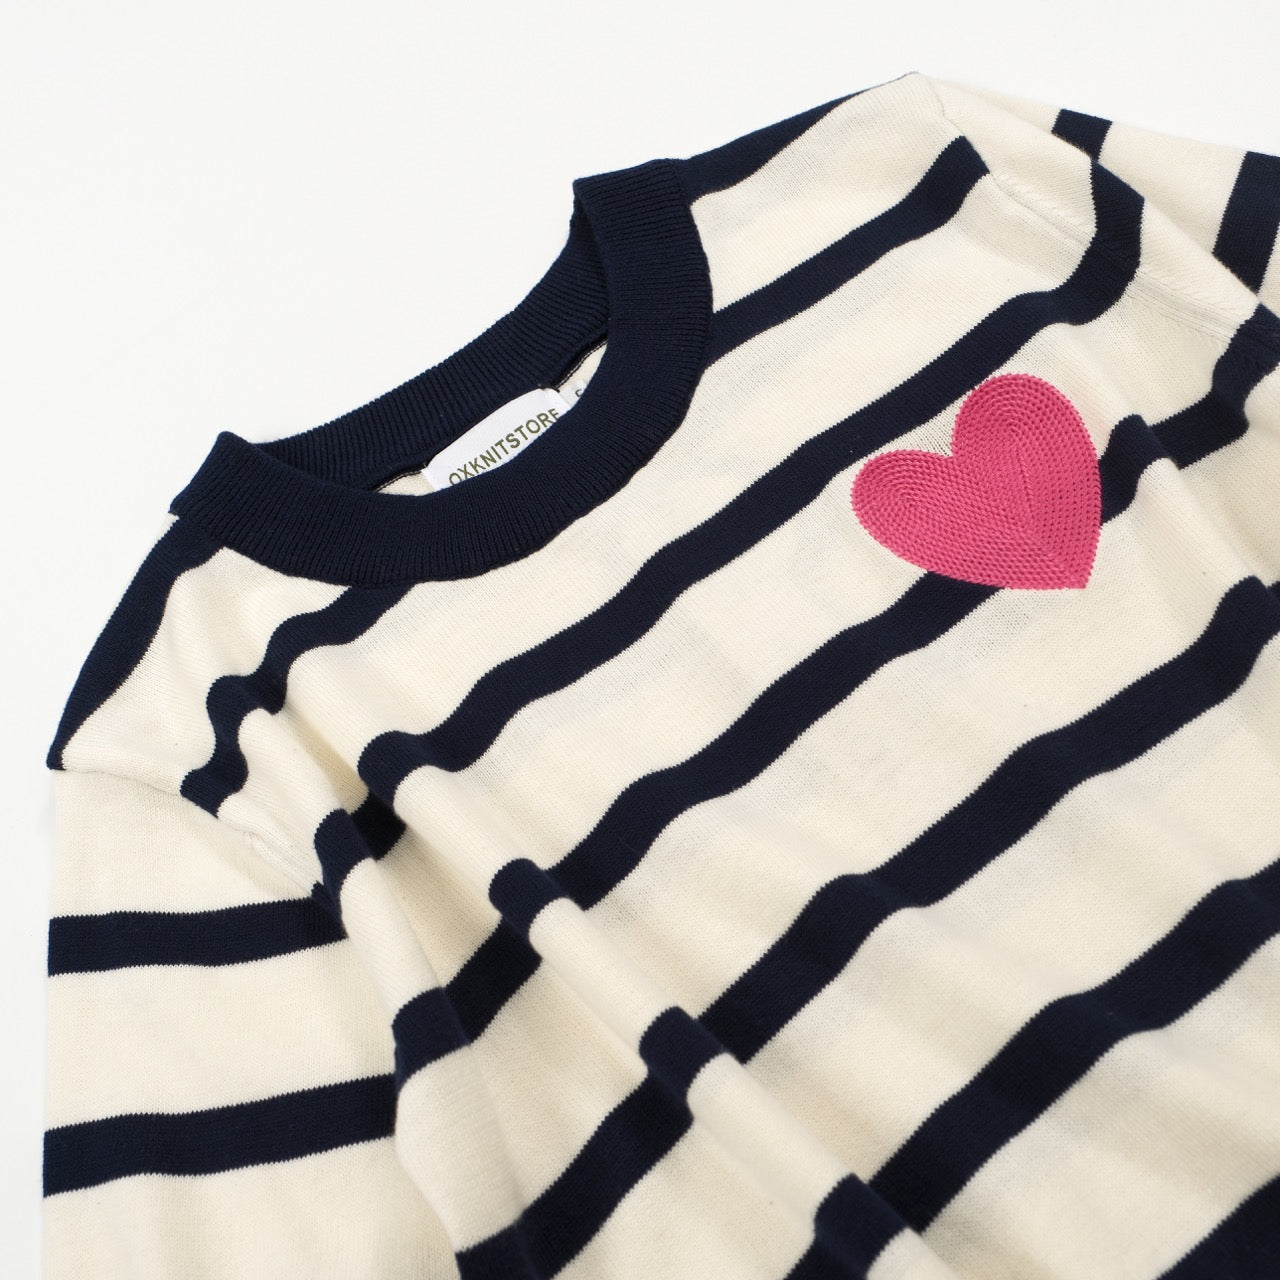 Women's striped vintage love embroidered knit T-shirt